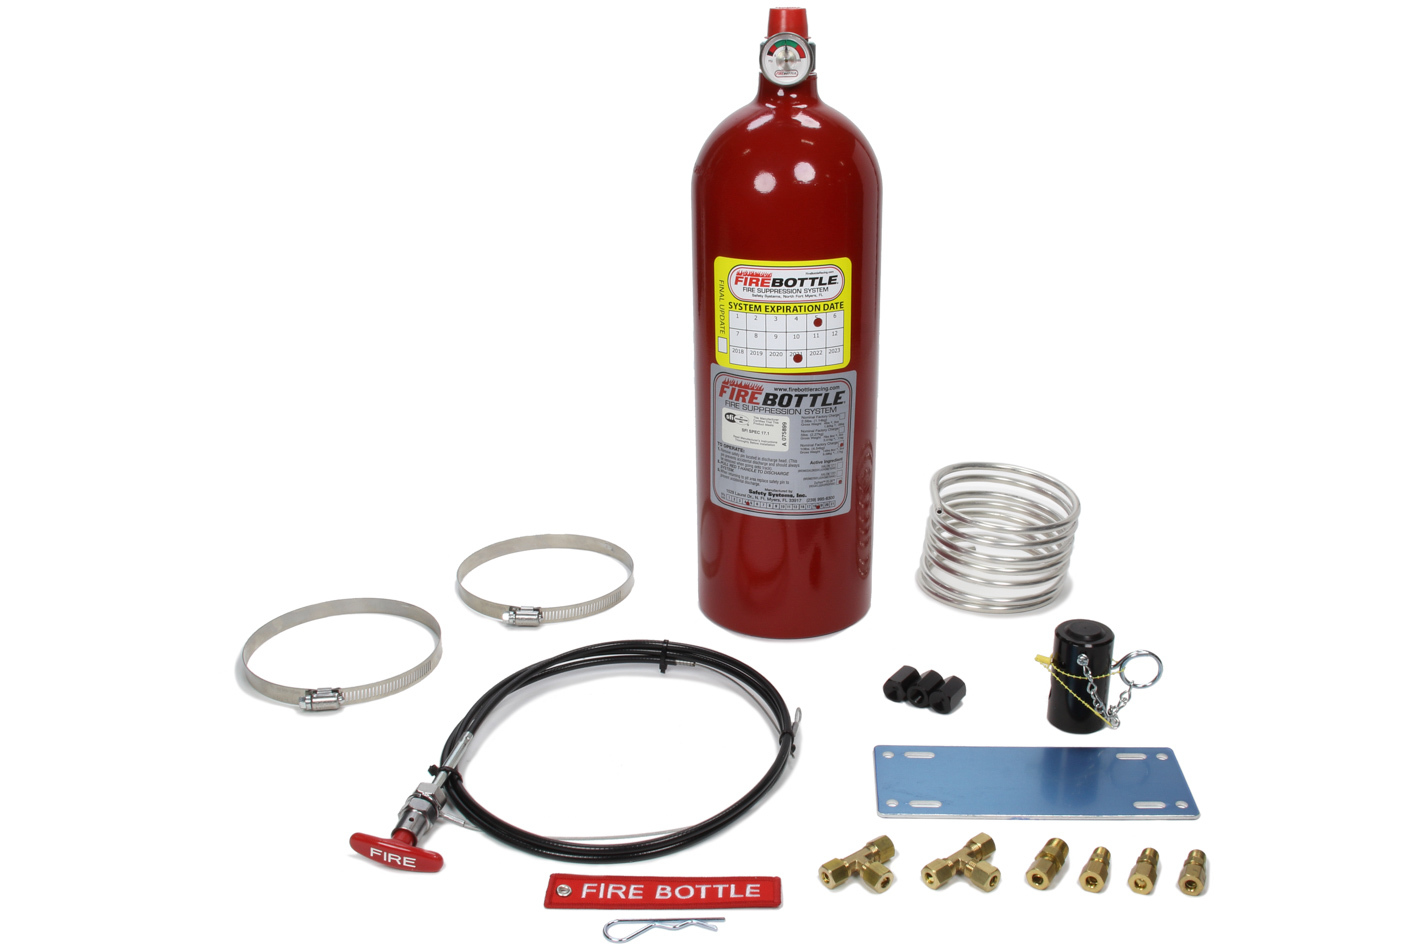 Safety Systems PRC-1000 Fire Suppression System, RC, Manual, FE-36, SFI Rated, 10.0 lb Bottle, Fittings / Hose / Mount / Pull Cable, Kit